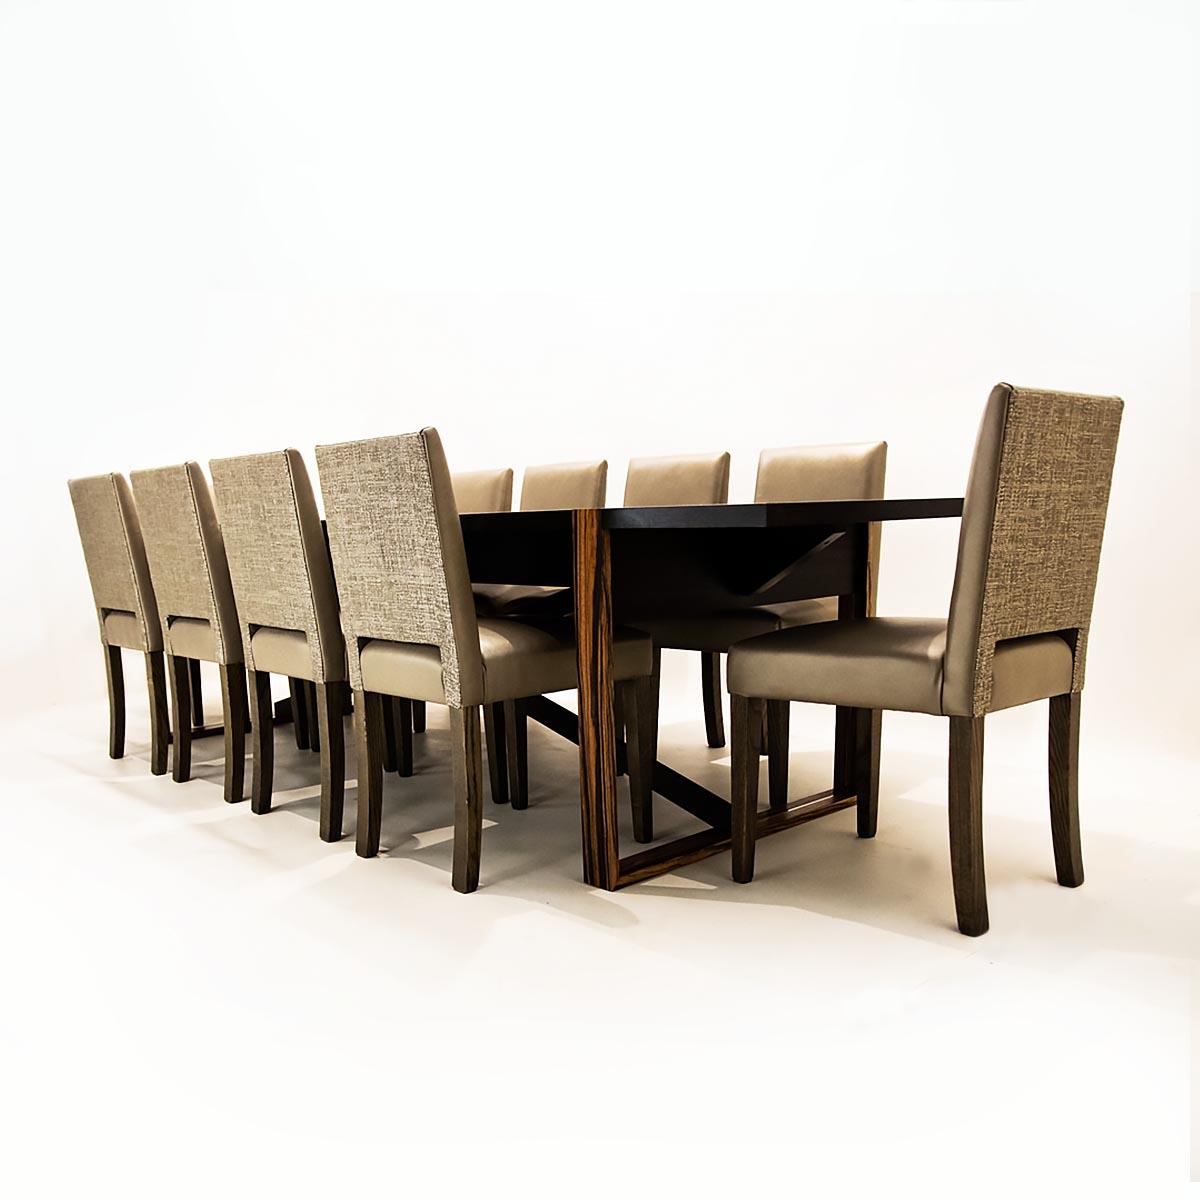 10 seat dining table with chairs